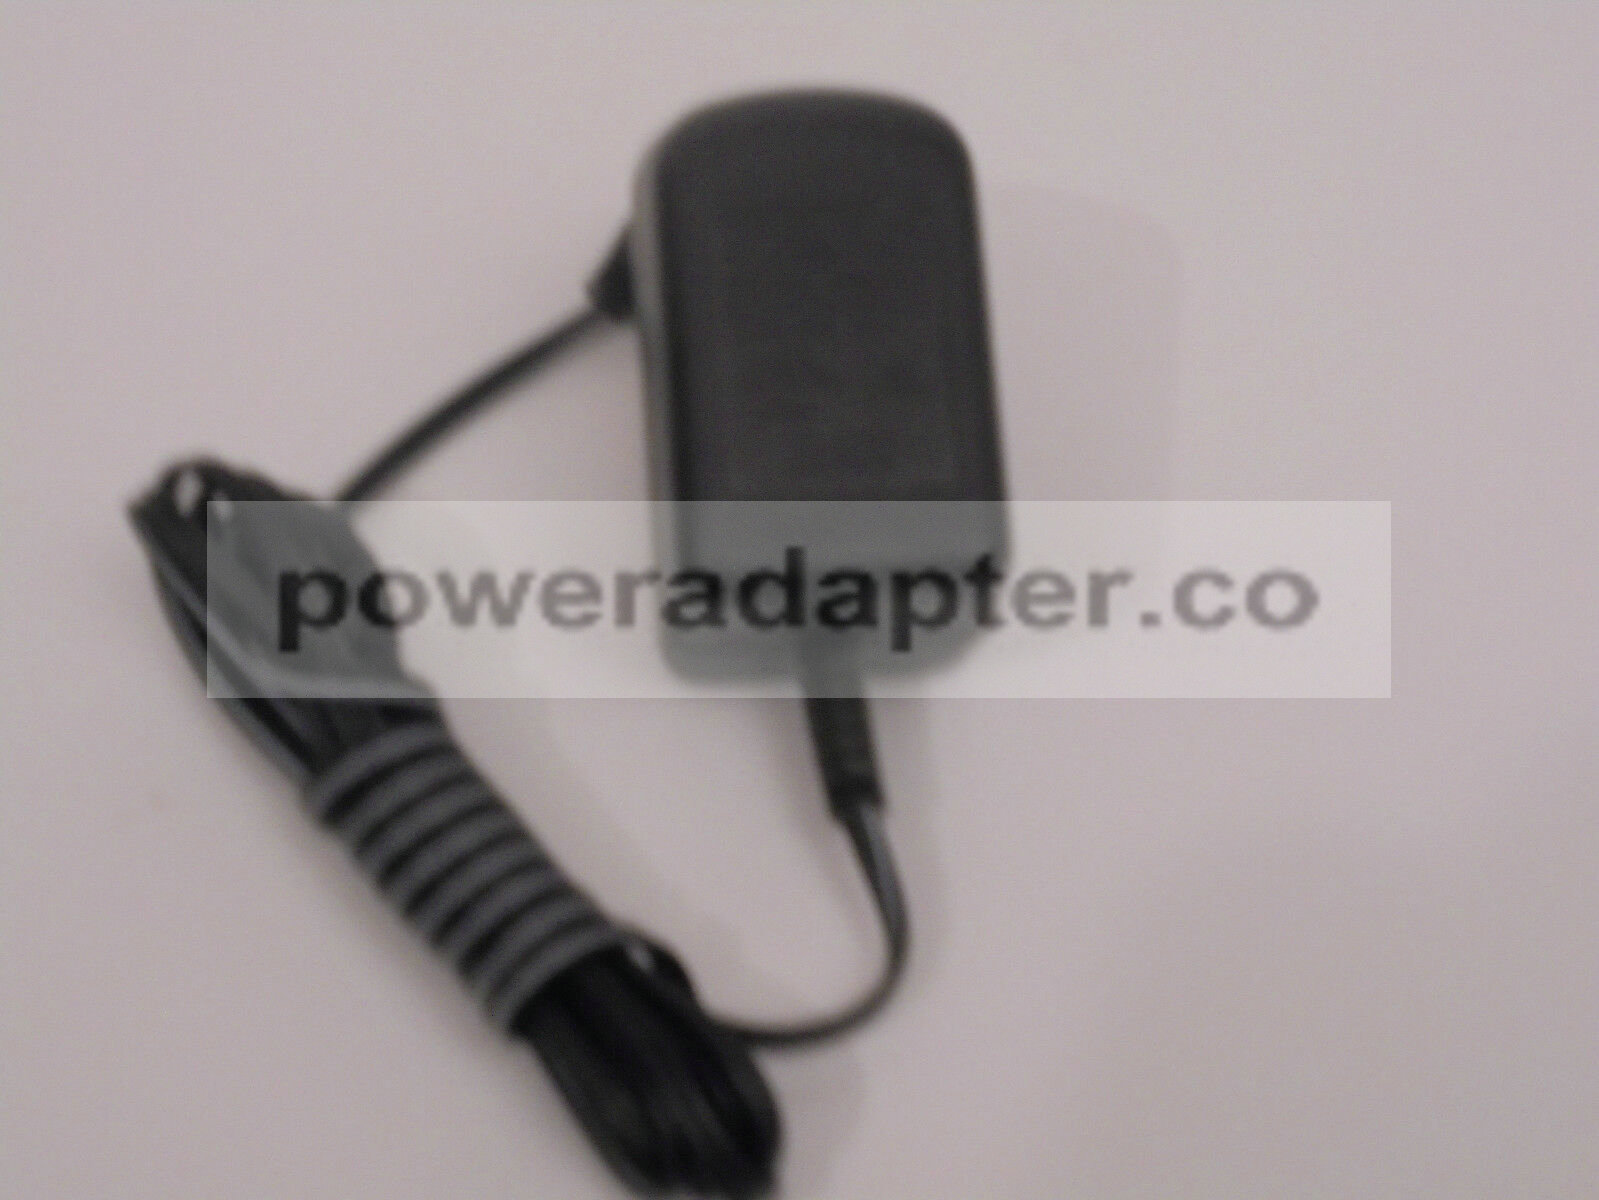 UD-0902 AC/DC POWER SUPPLY ADAPTER 9V, 150mA Condition: new Brand: Black and Decker Modified Item: No Non-Domestic